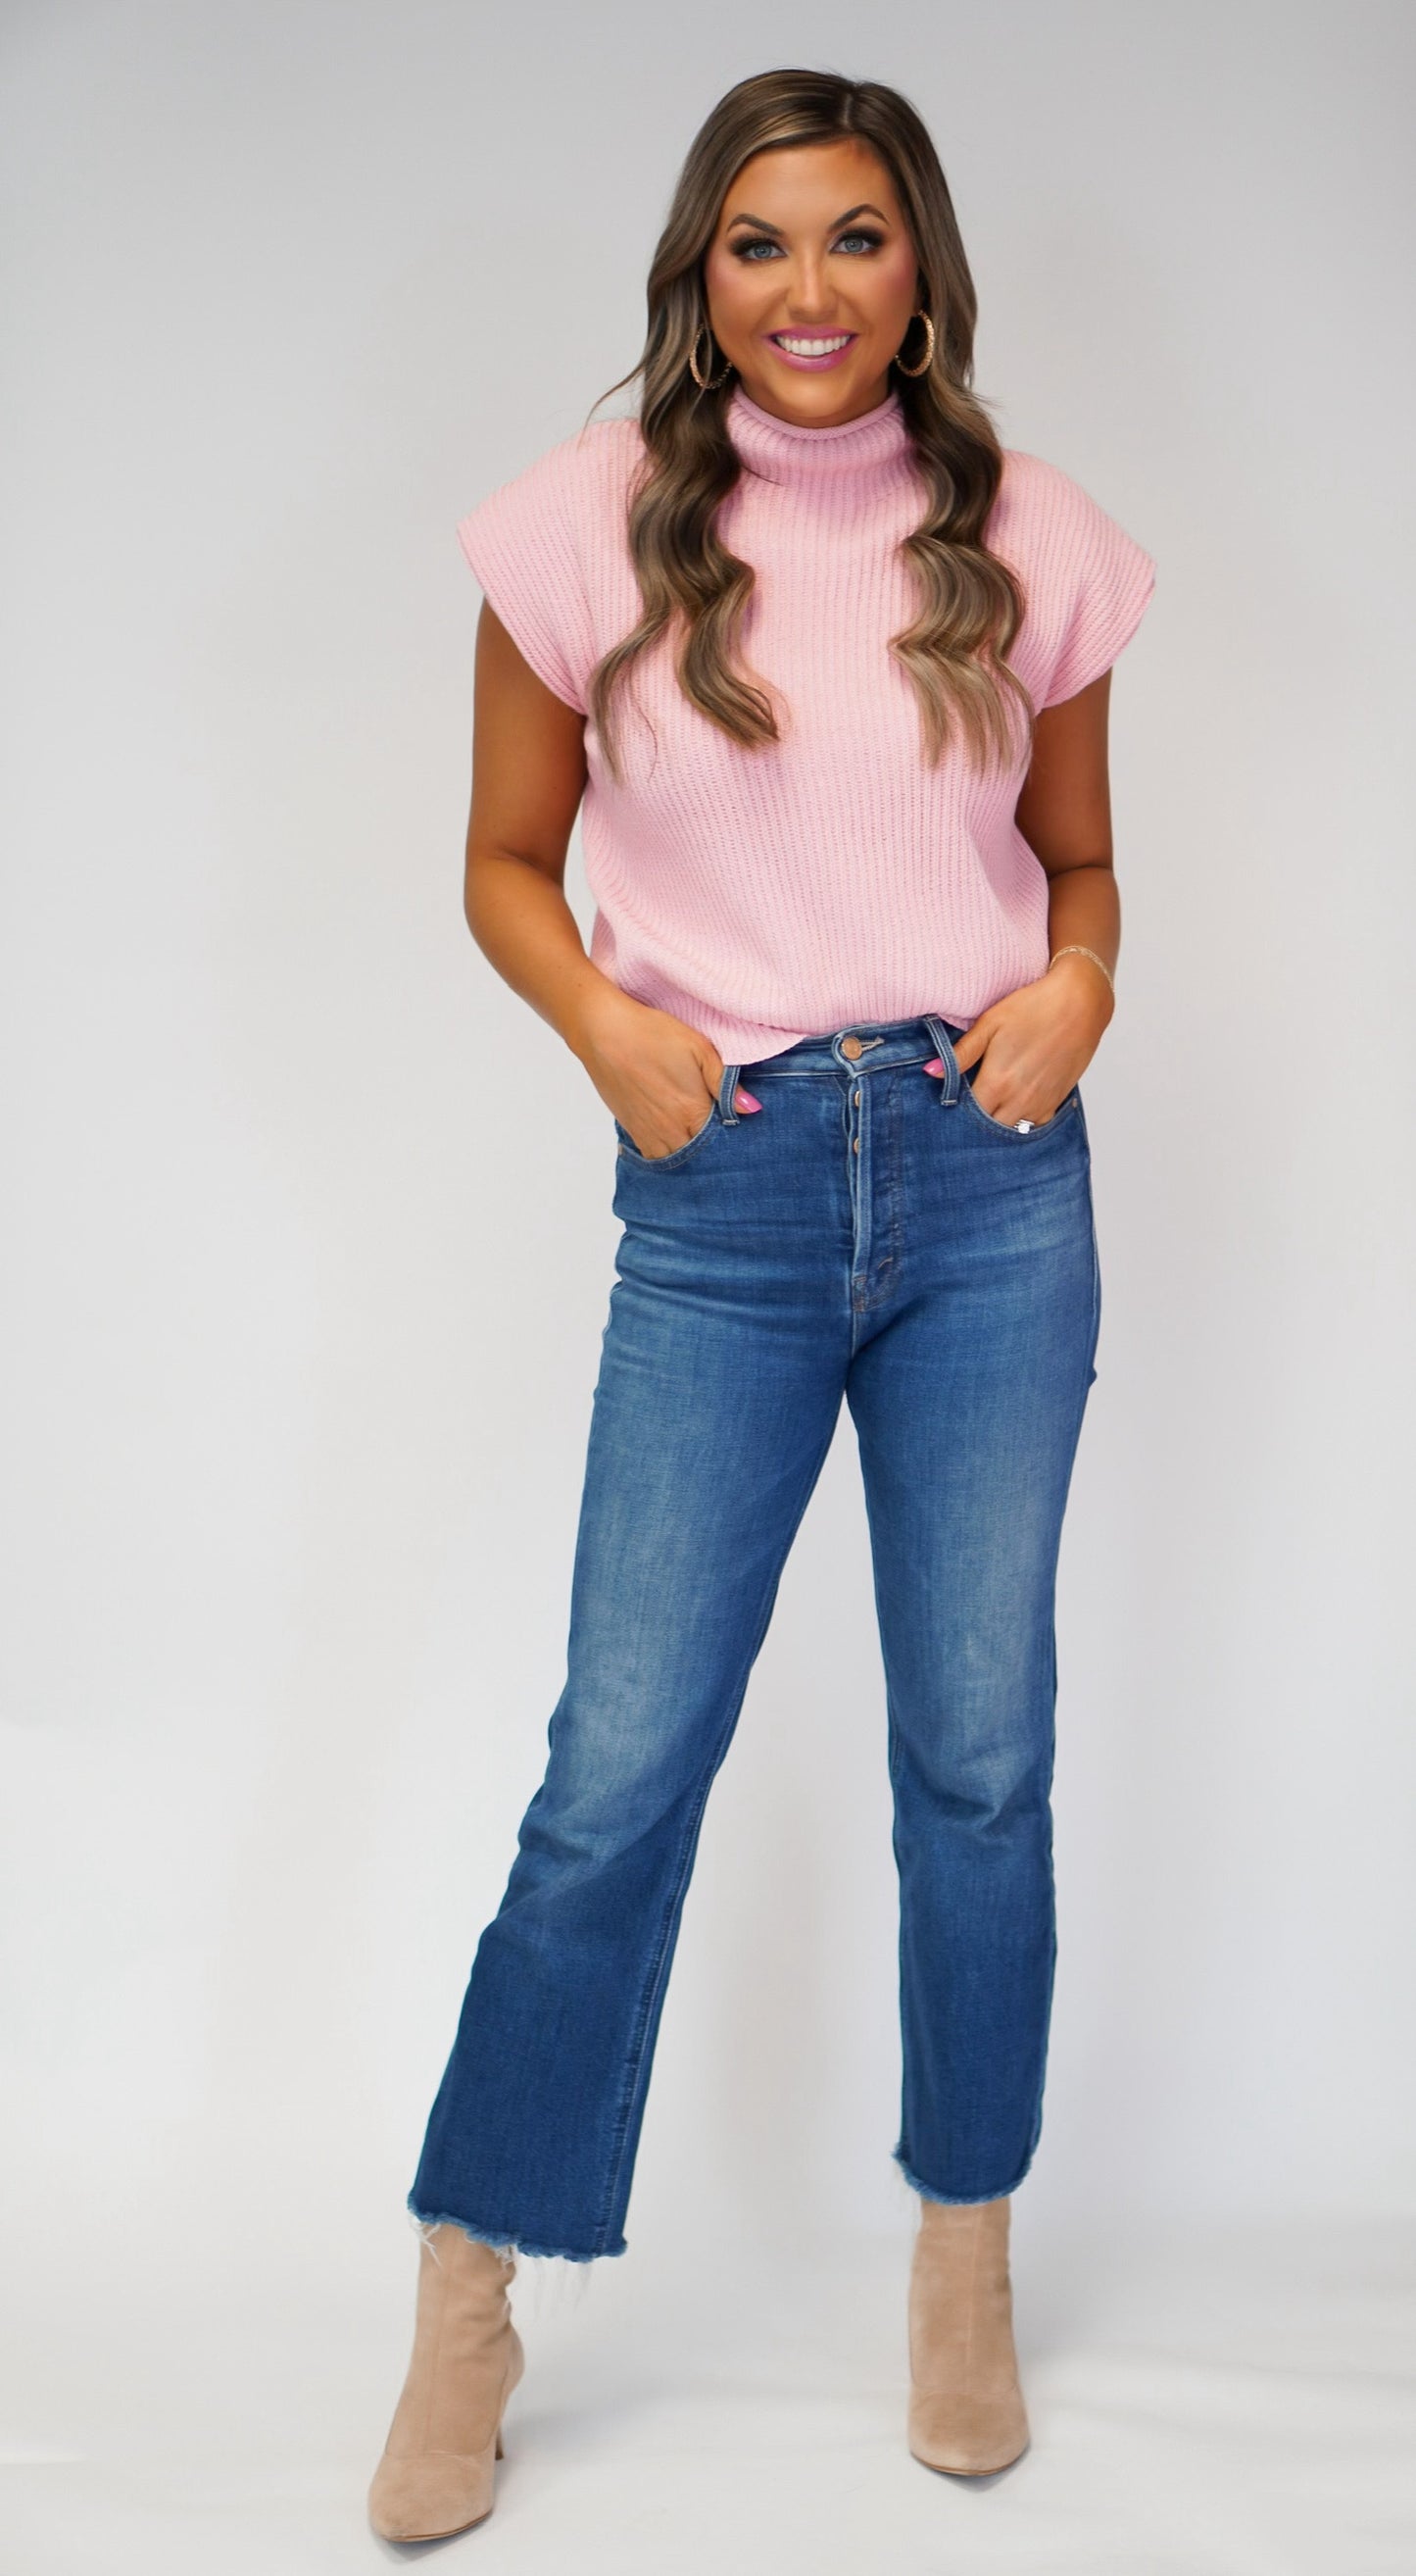 girl standing with hands in jean pockets wearing light pink sweater vest with jeans and boots on 